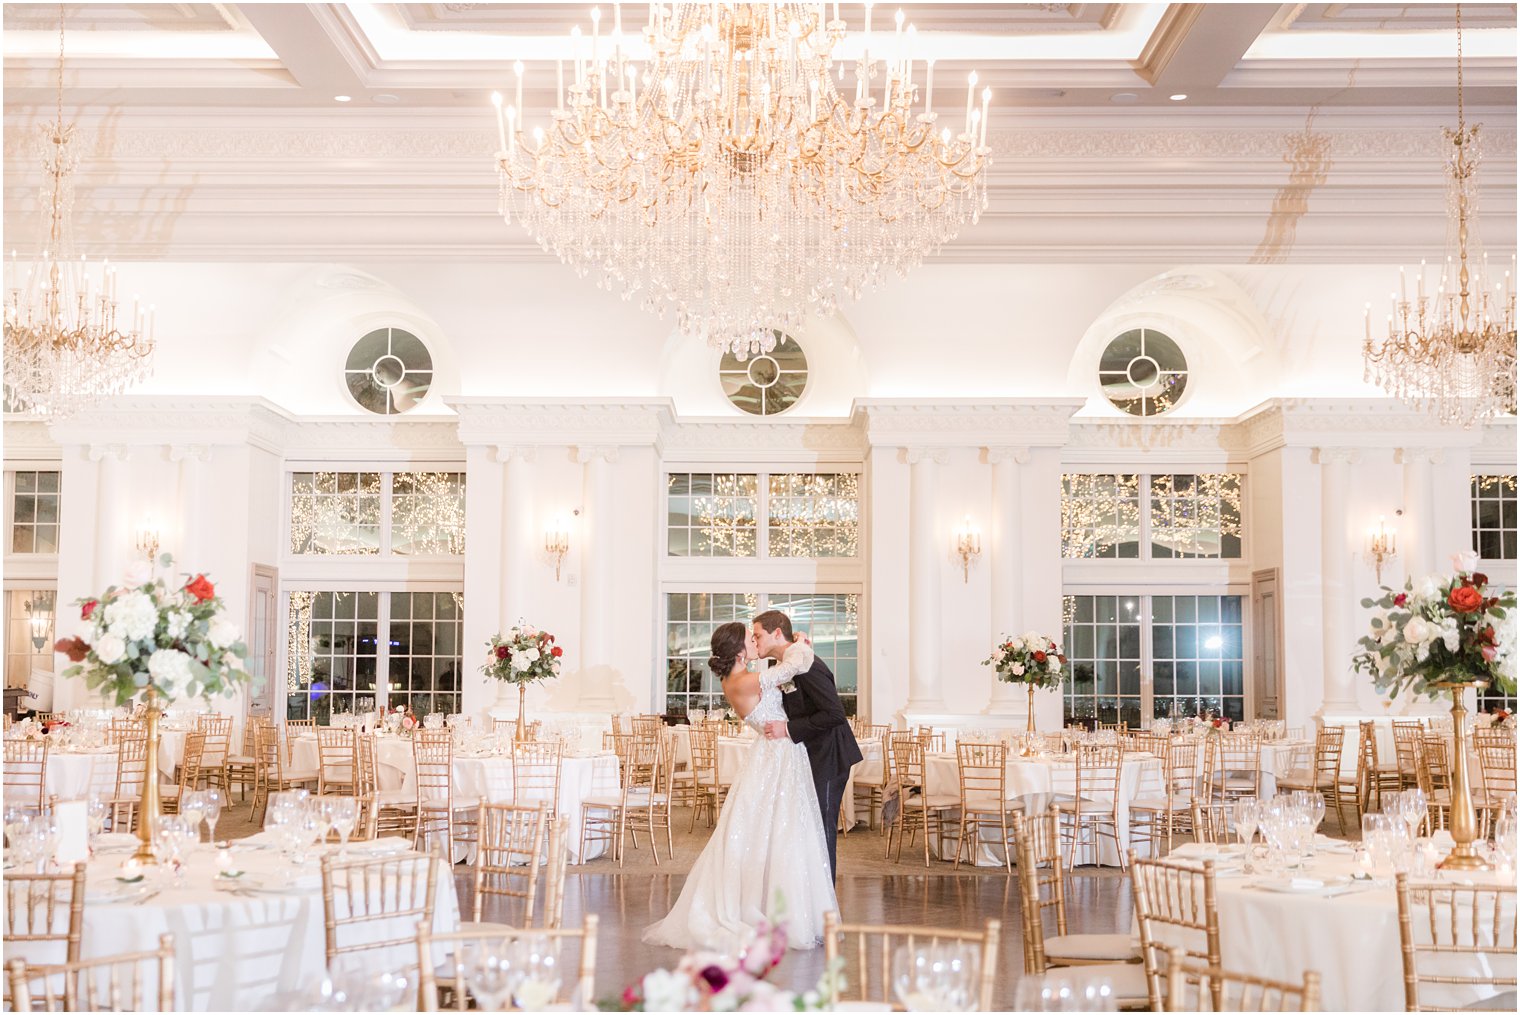 newlyweds kiss in ballroom at Park Chateau Estate with decor for winter wedding